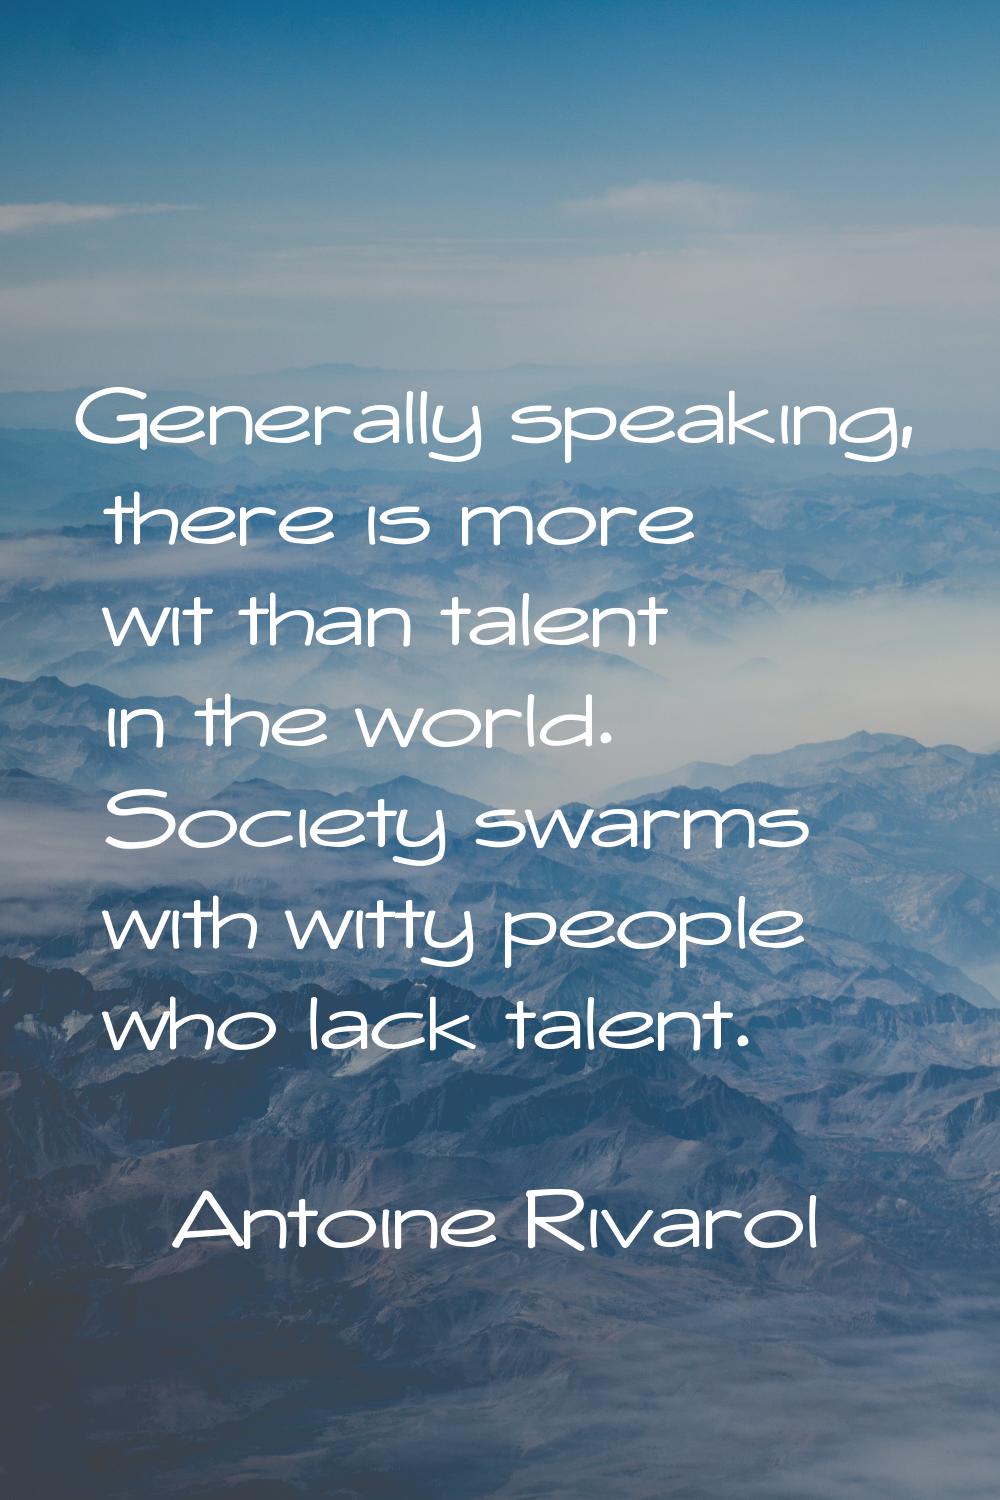 Generally speaking, there is more wit than talent in the world. Society swarms with witty people wh